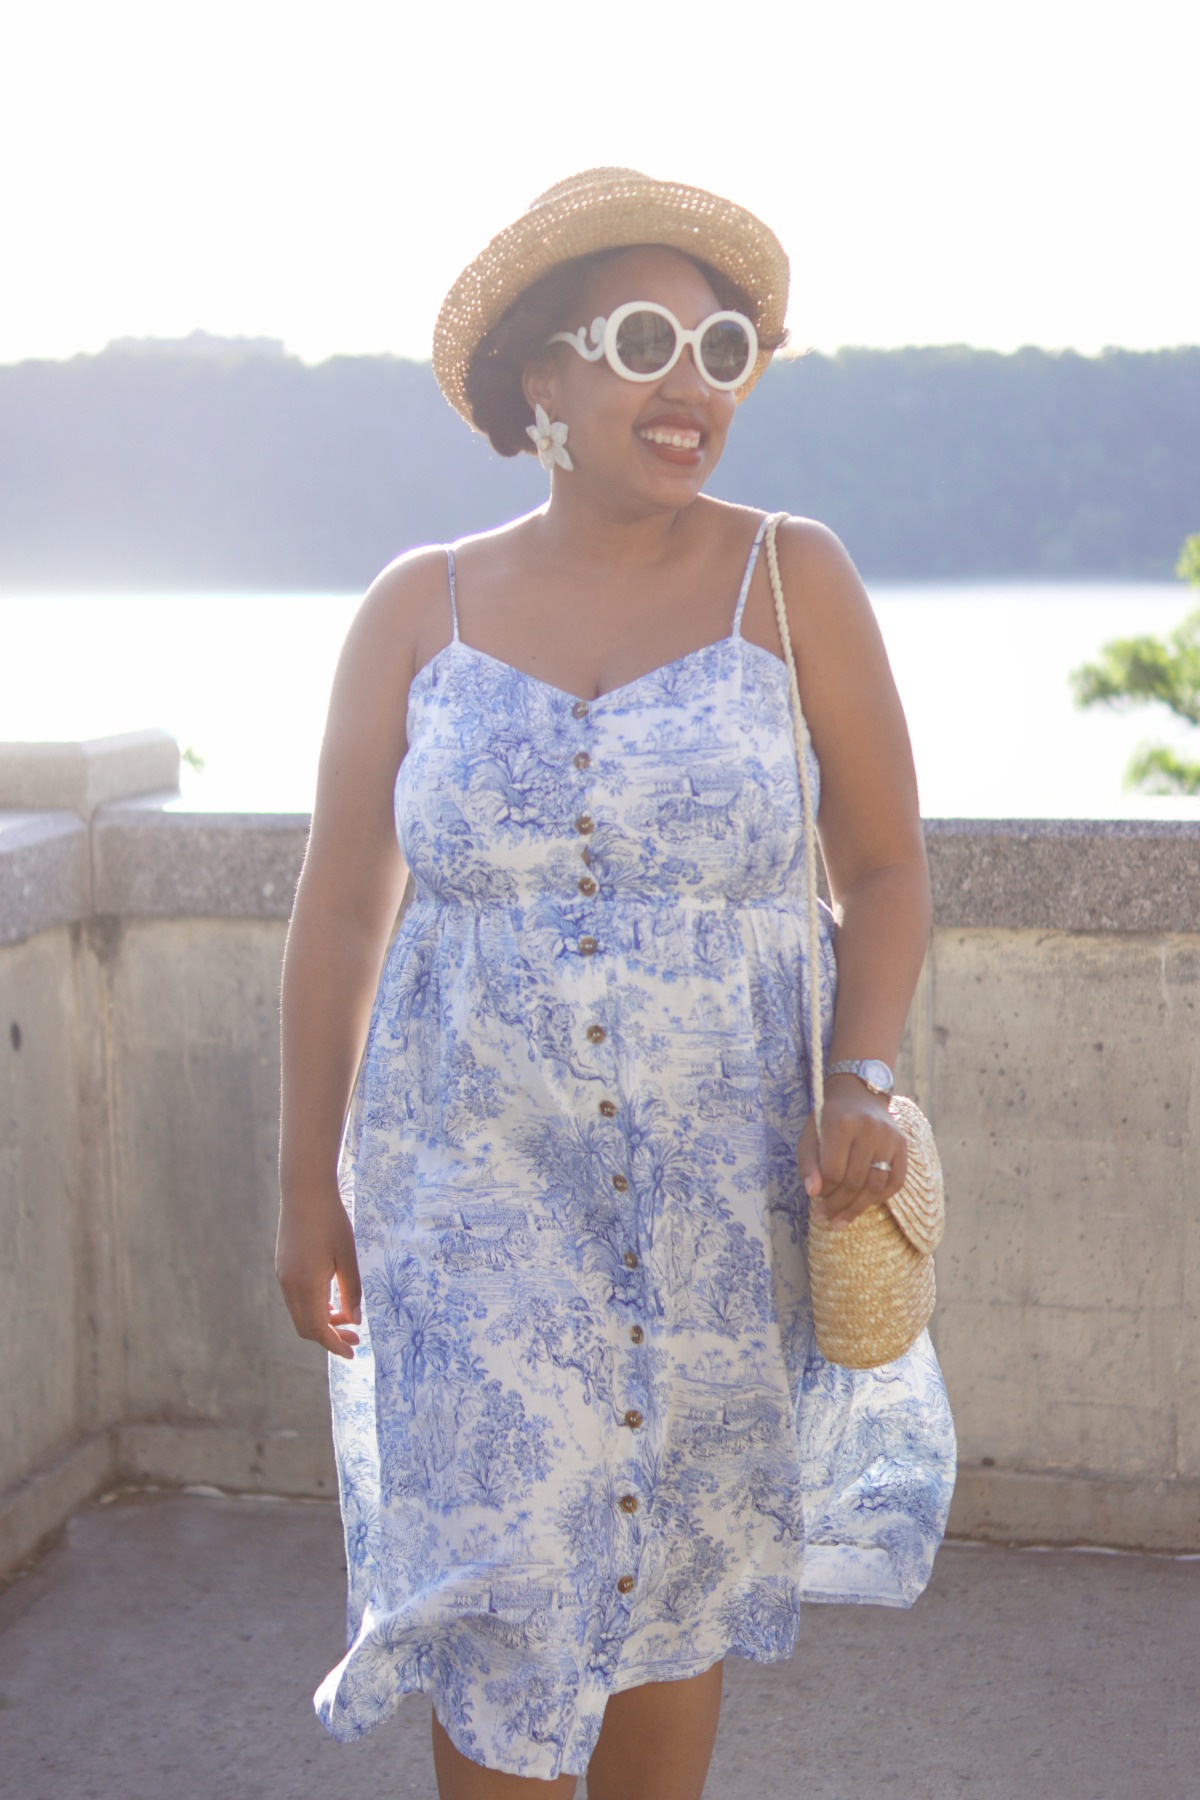 Dior Inspired Toile de Jouy-Dress, H&M Dress, Toile Print dress, Mommy Blogger, Fashion Blogger